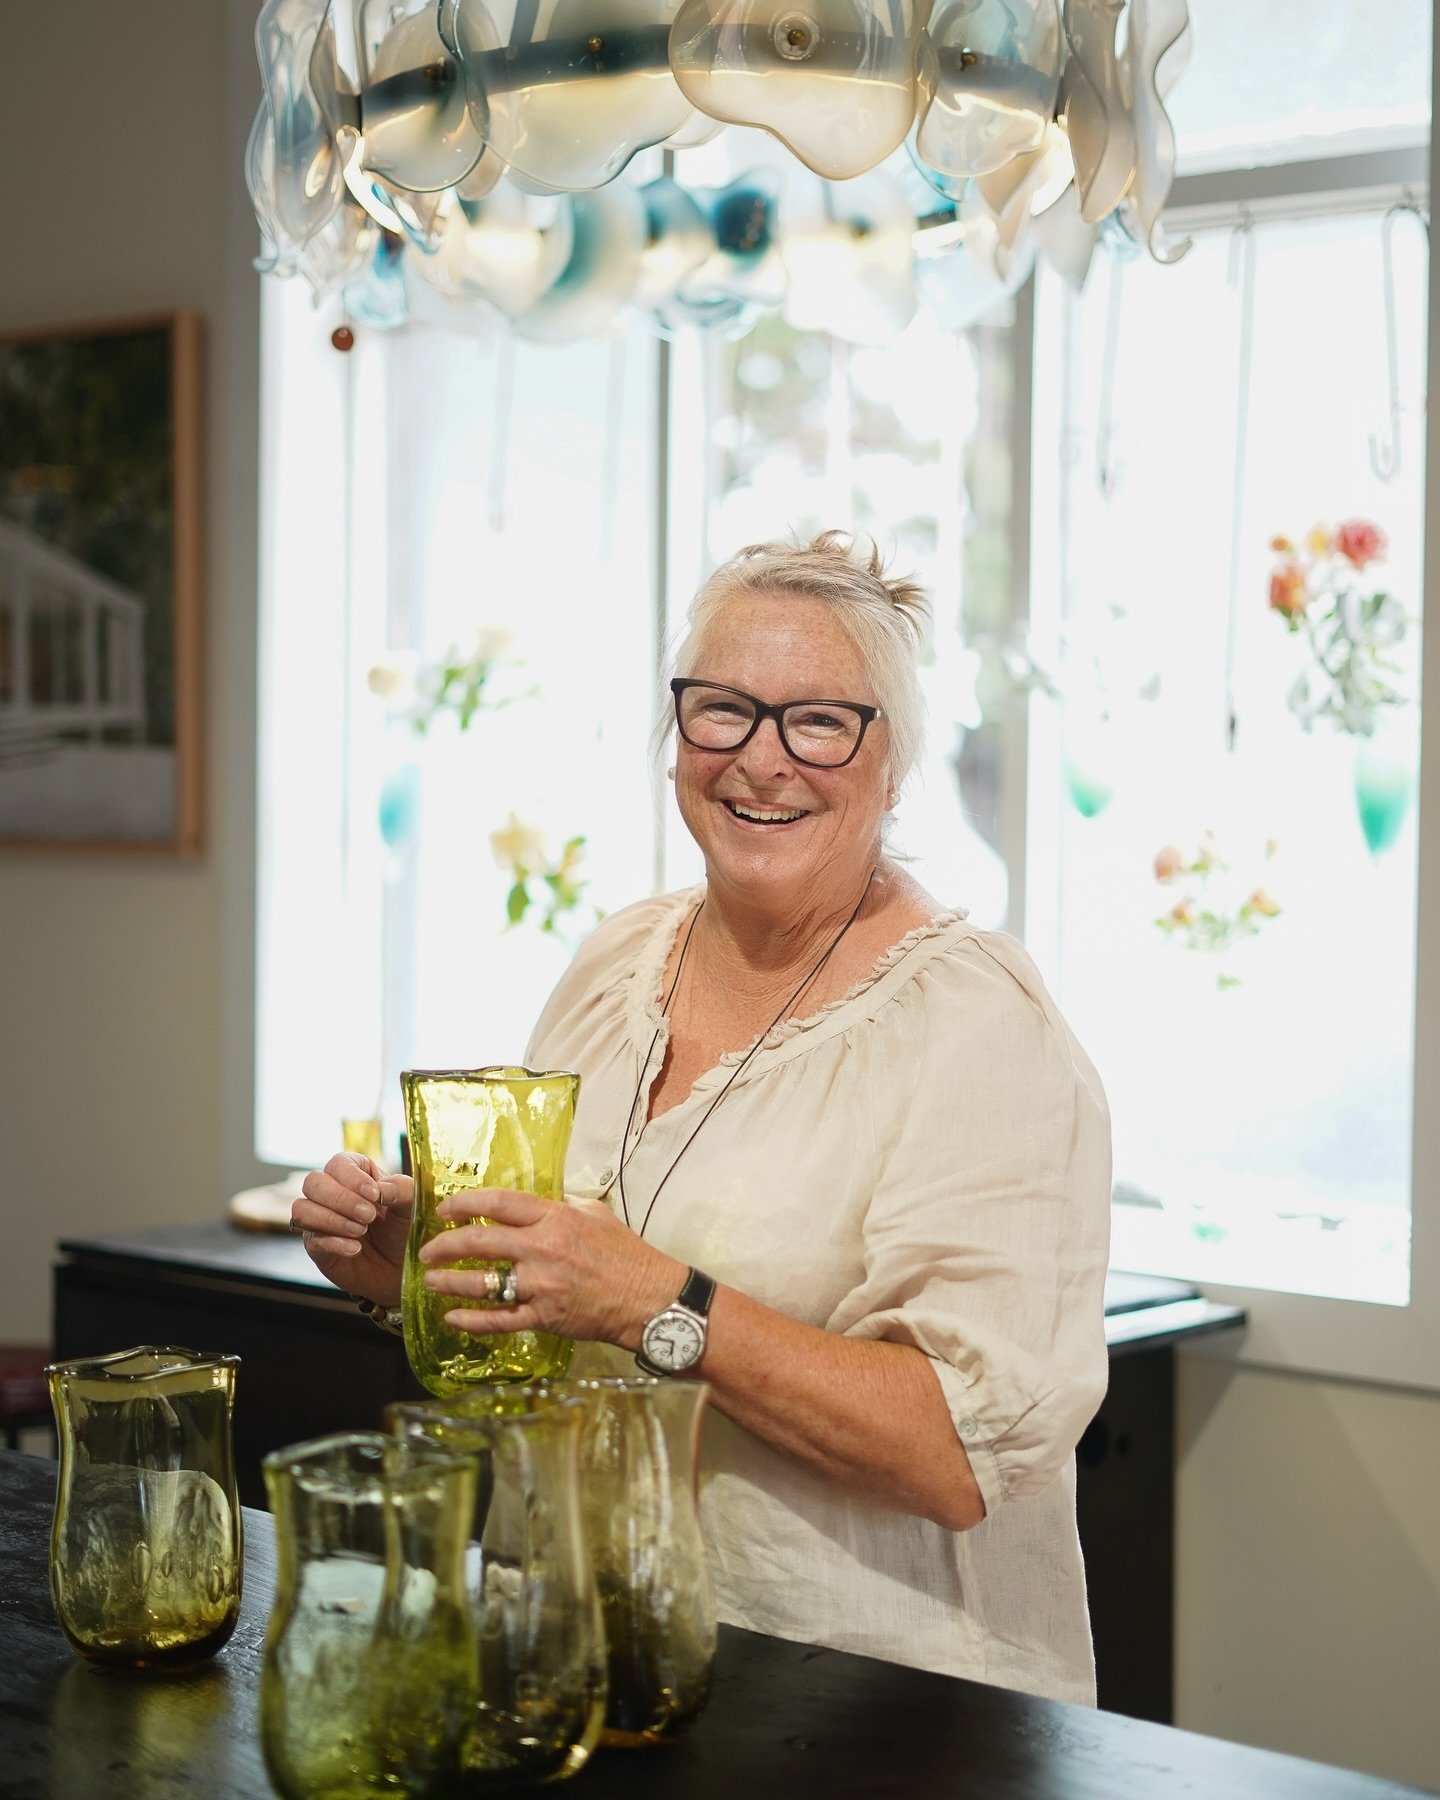 The wonderful Julieanne is a fixture with us now on a Wednesday in the shop. She will welcome you into our space with a cheery hello, chat about the space, and help however she can. 

A longtime friend of The Studio and member of our community, Julie